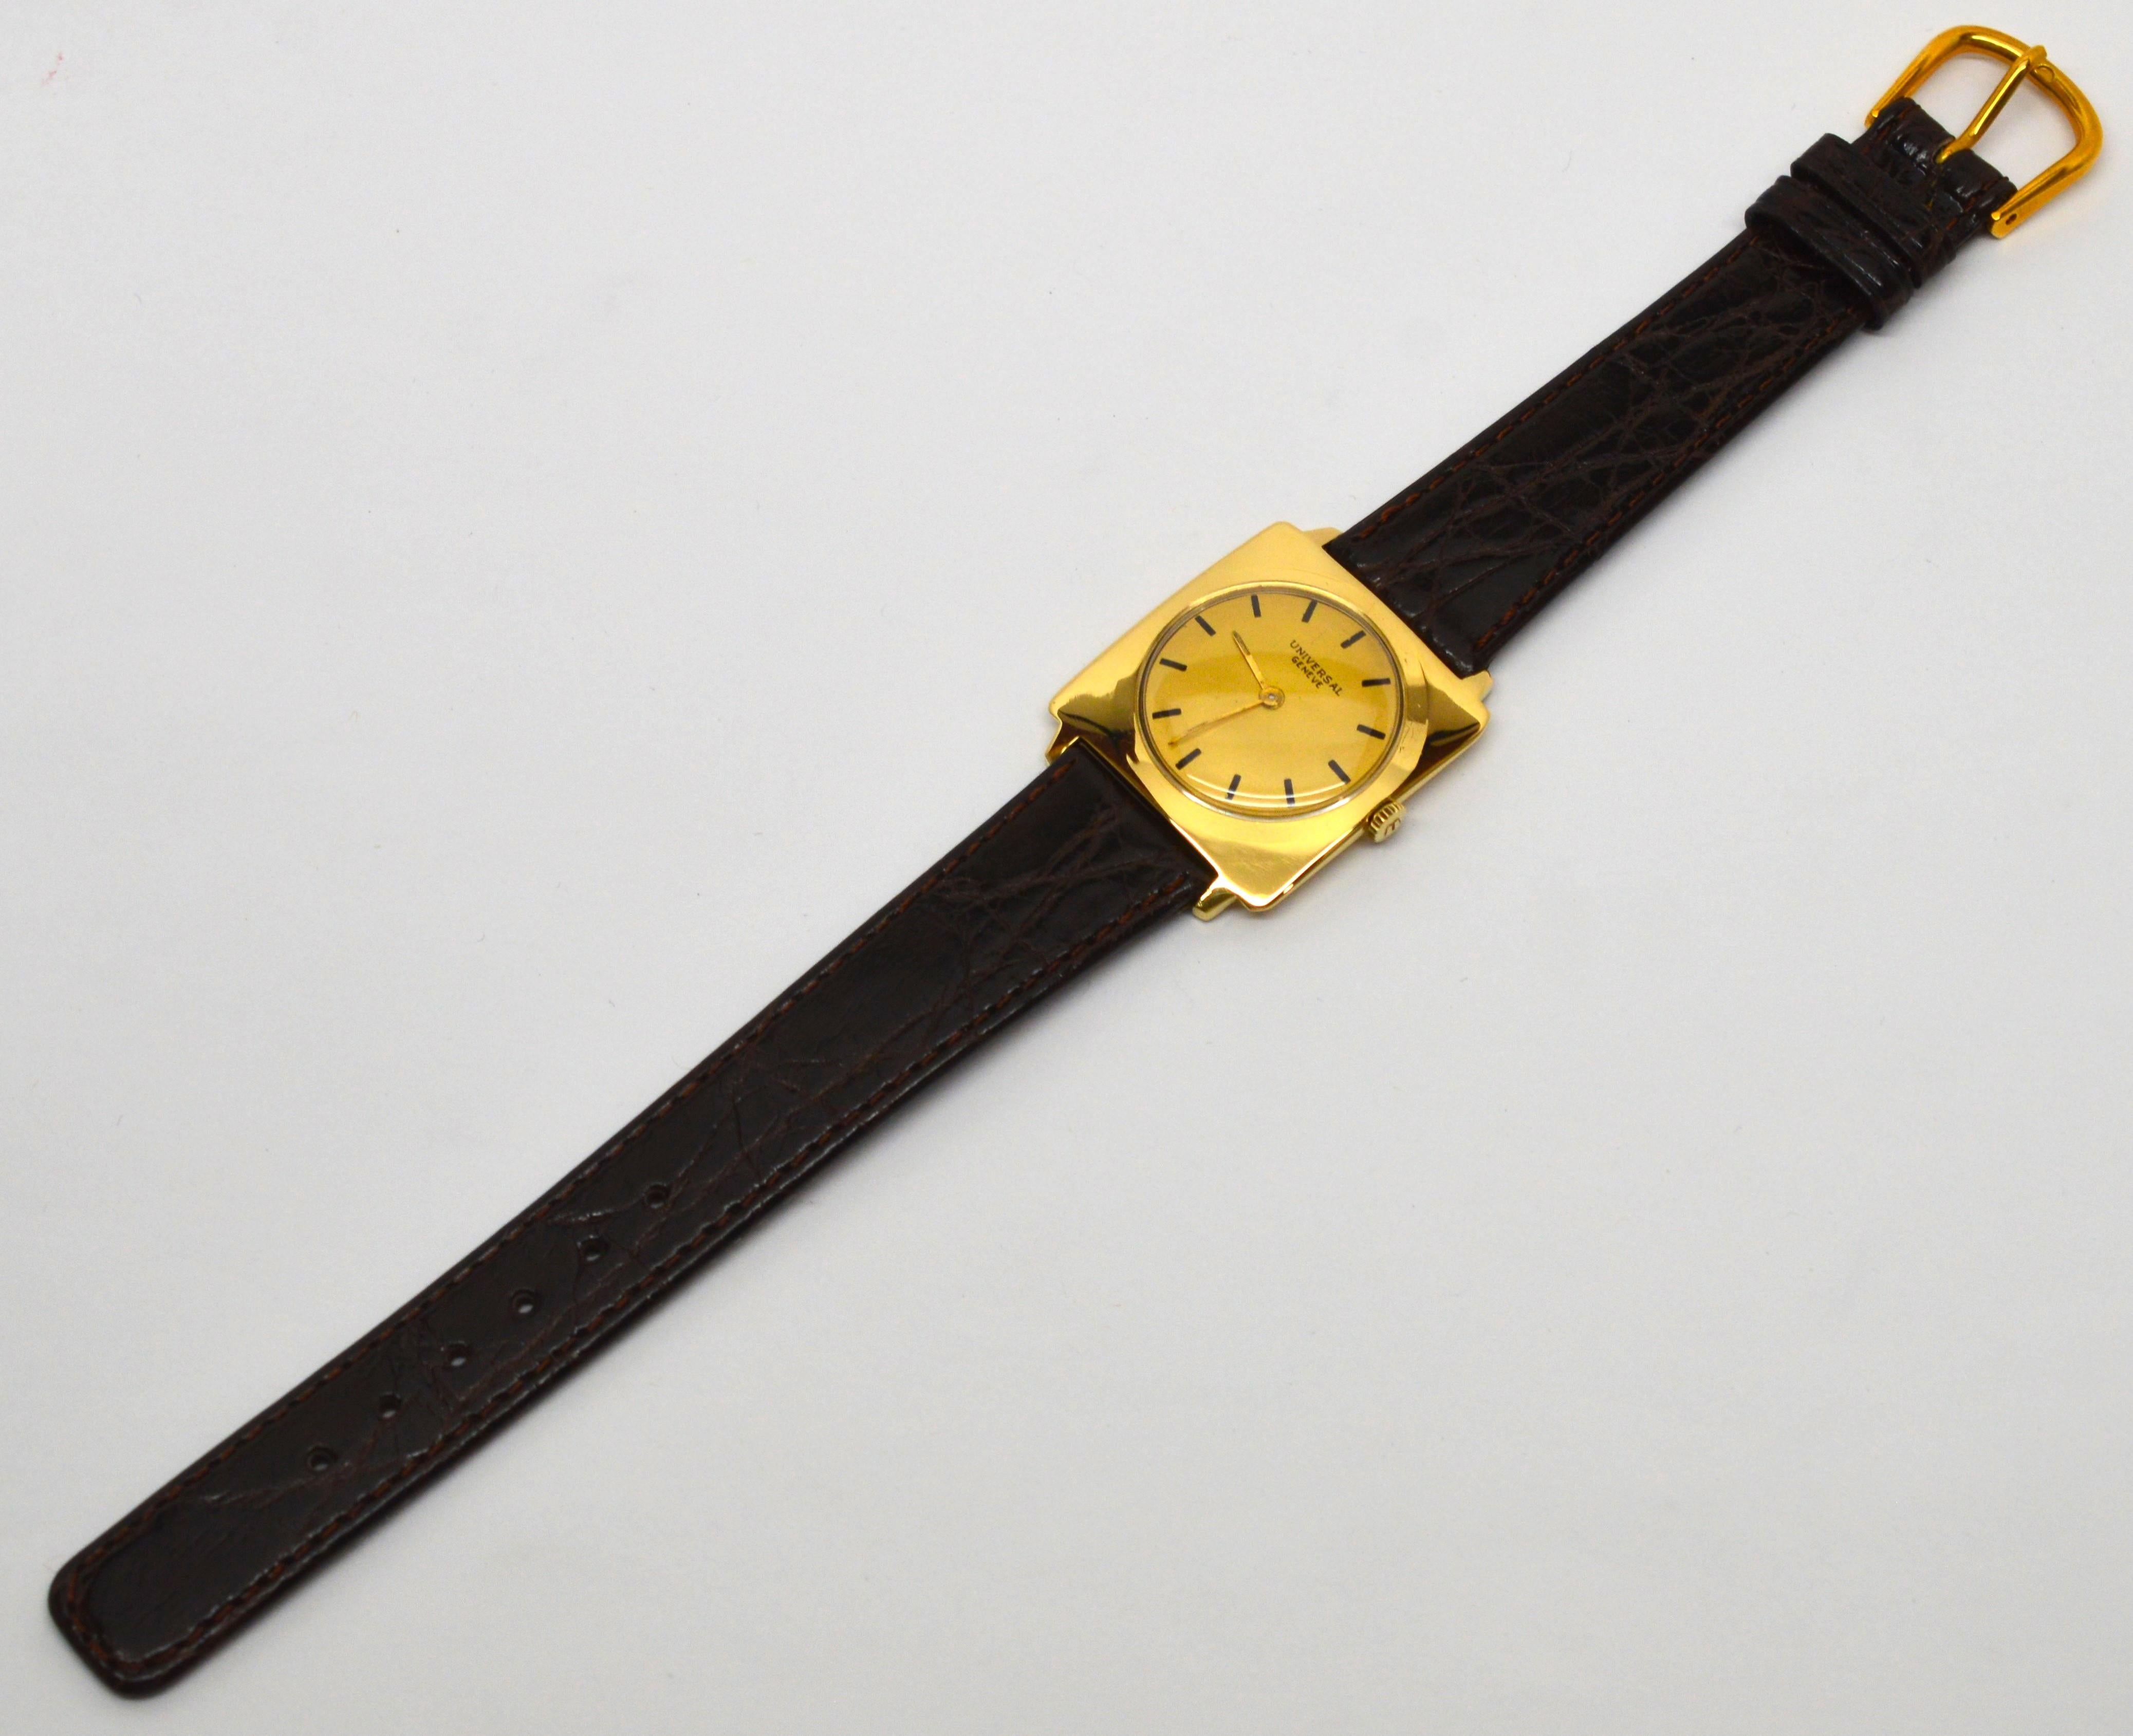 Smart looking with a square case made of 18K yellow gold, this unusual vintage Universal Men's Wrist Watch is a unique addition to one's coveted watch collection. With simple elegance, this circa late '40's  square case (no. 18203-1) measures a